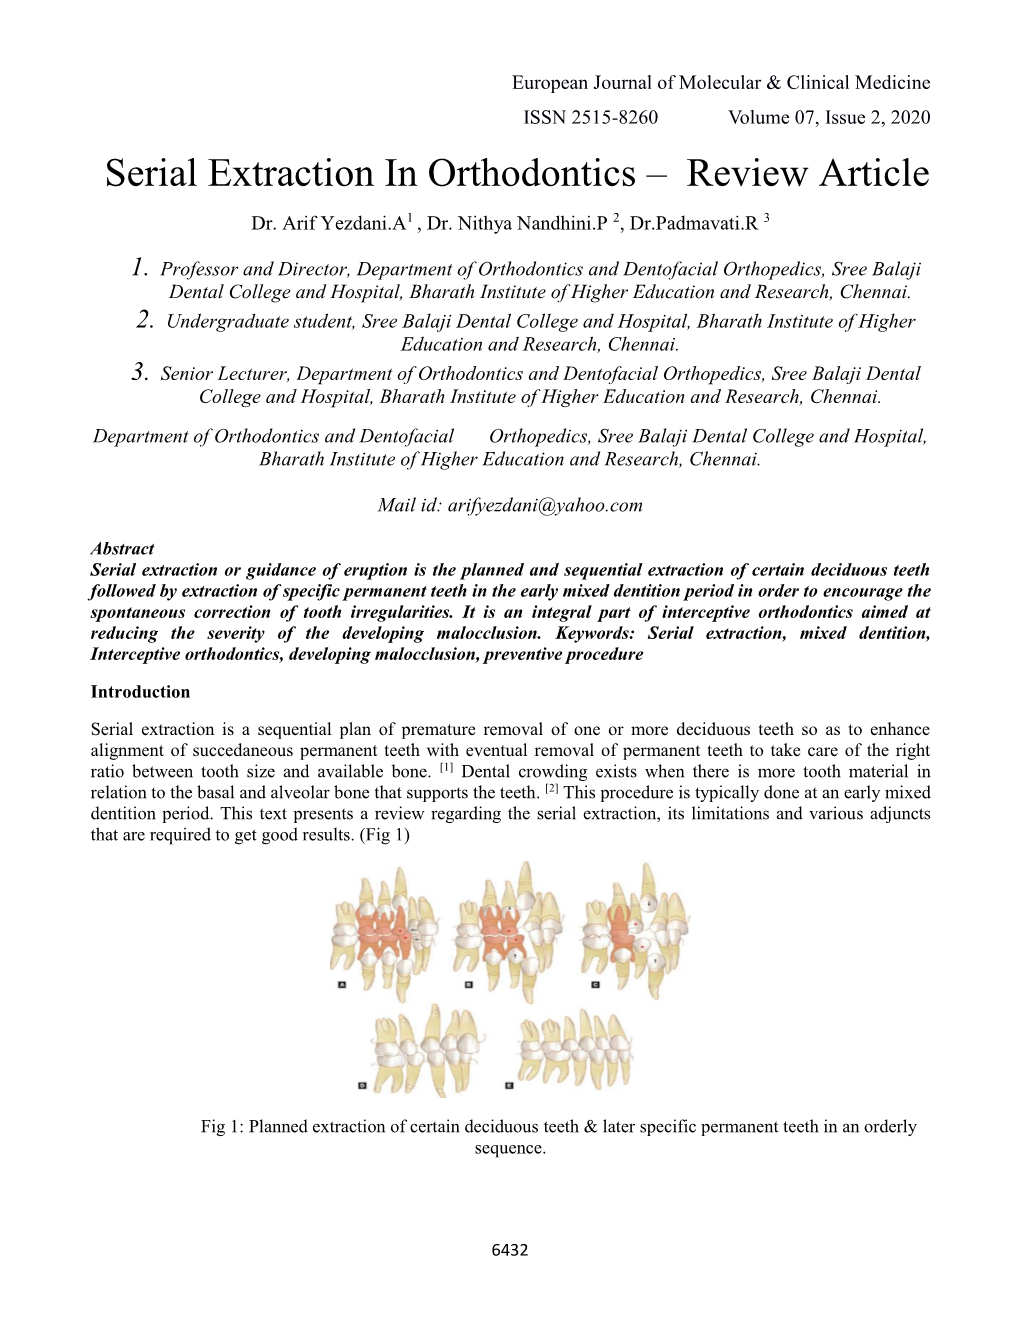 Serial Extraction in Orthodontics – Review Article Dr